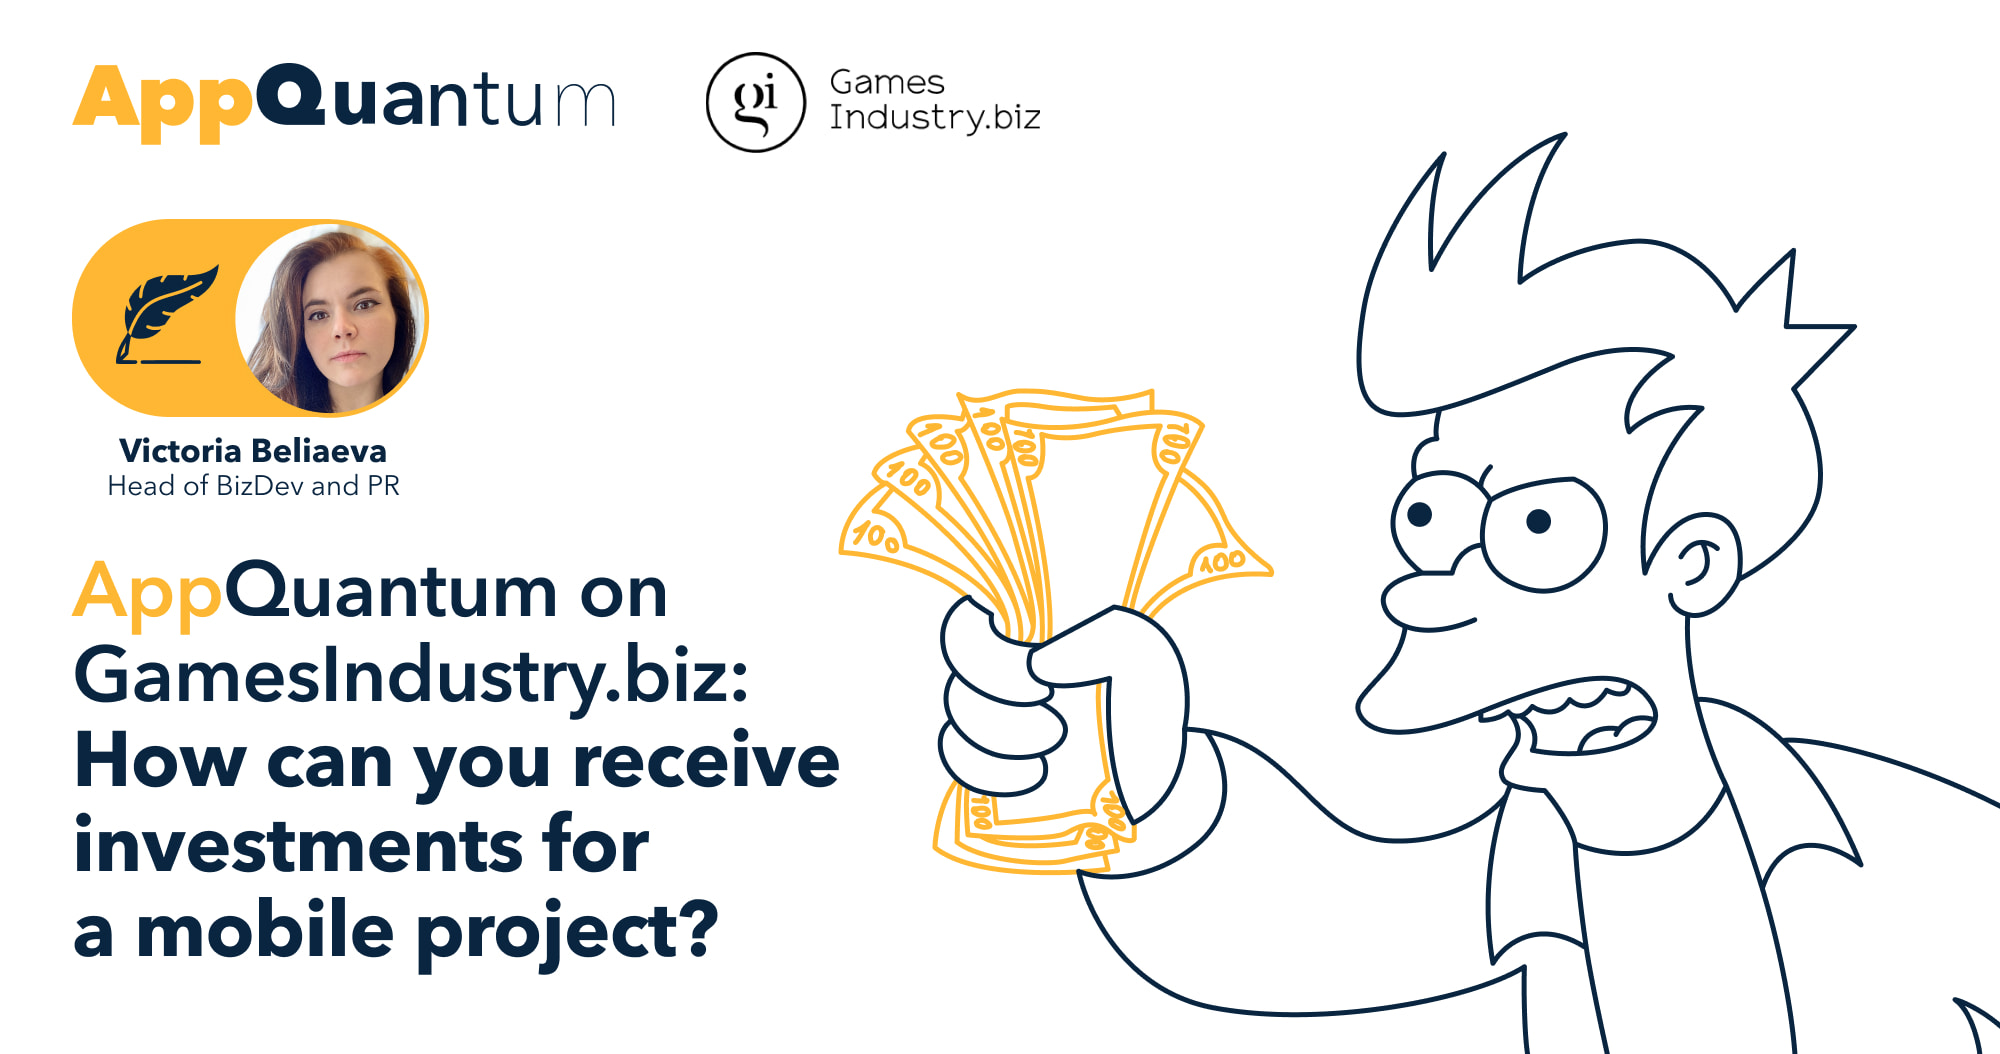 AppQuantum on GamesIndustry.biz: How Can You Receive Investments for a Mobile Project?